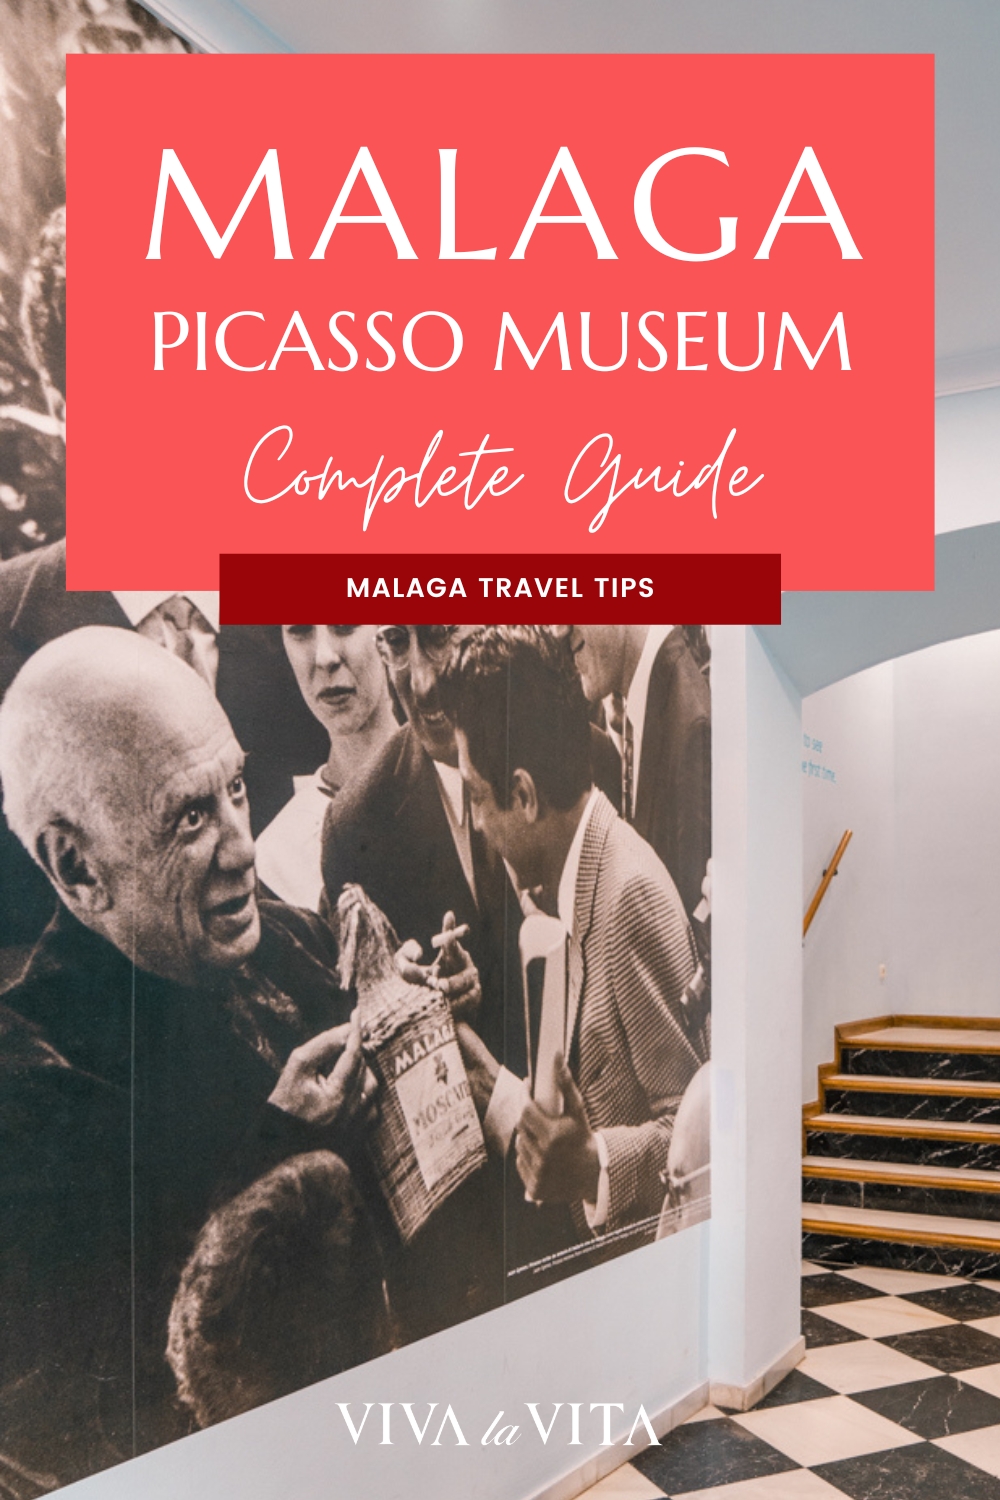 Pinterest image showing the works and art of Picasso, with a headline: Malaga Picasso Museum, Complete guide with malaga travel tips